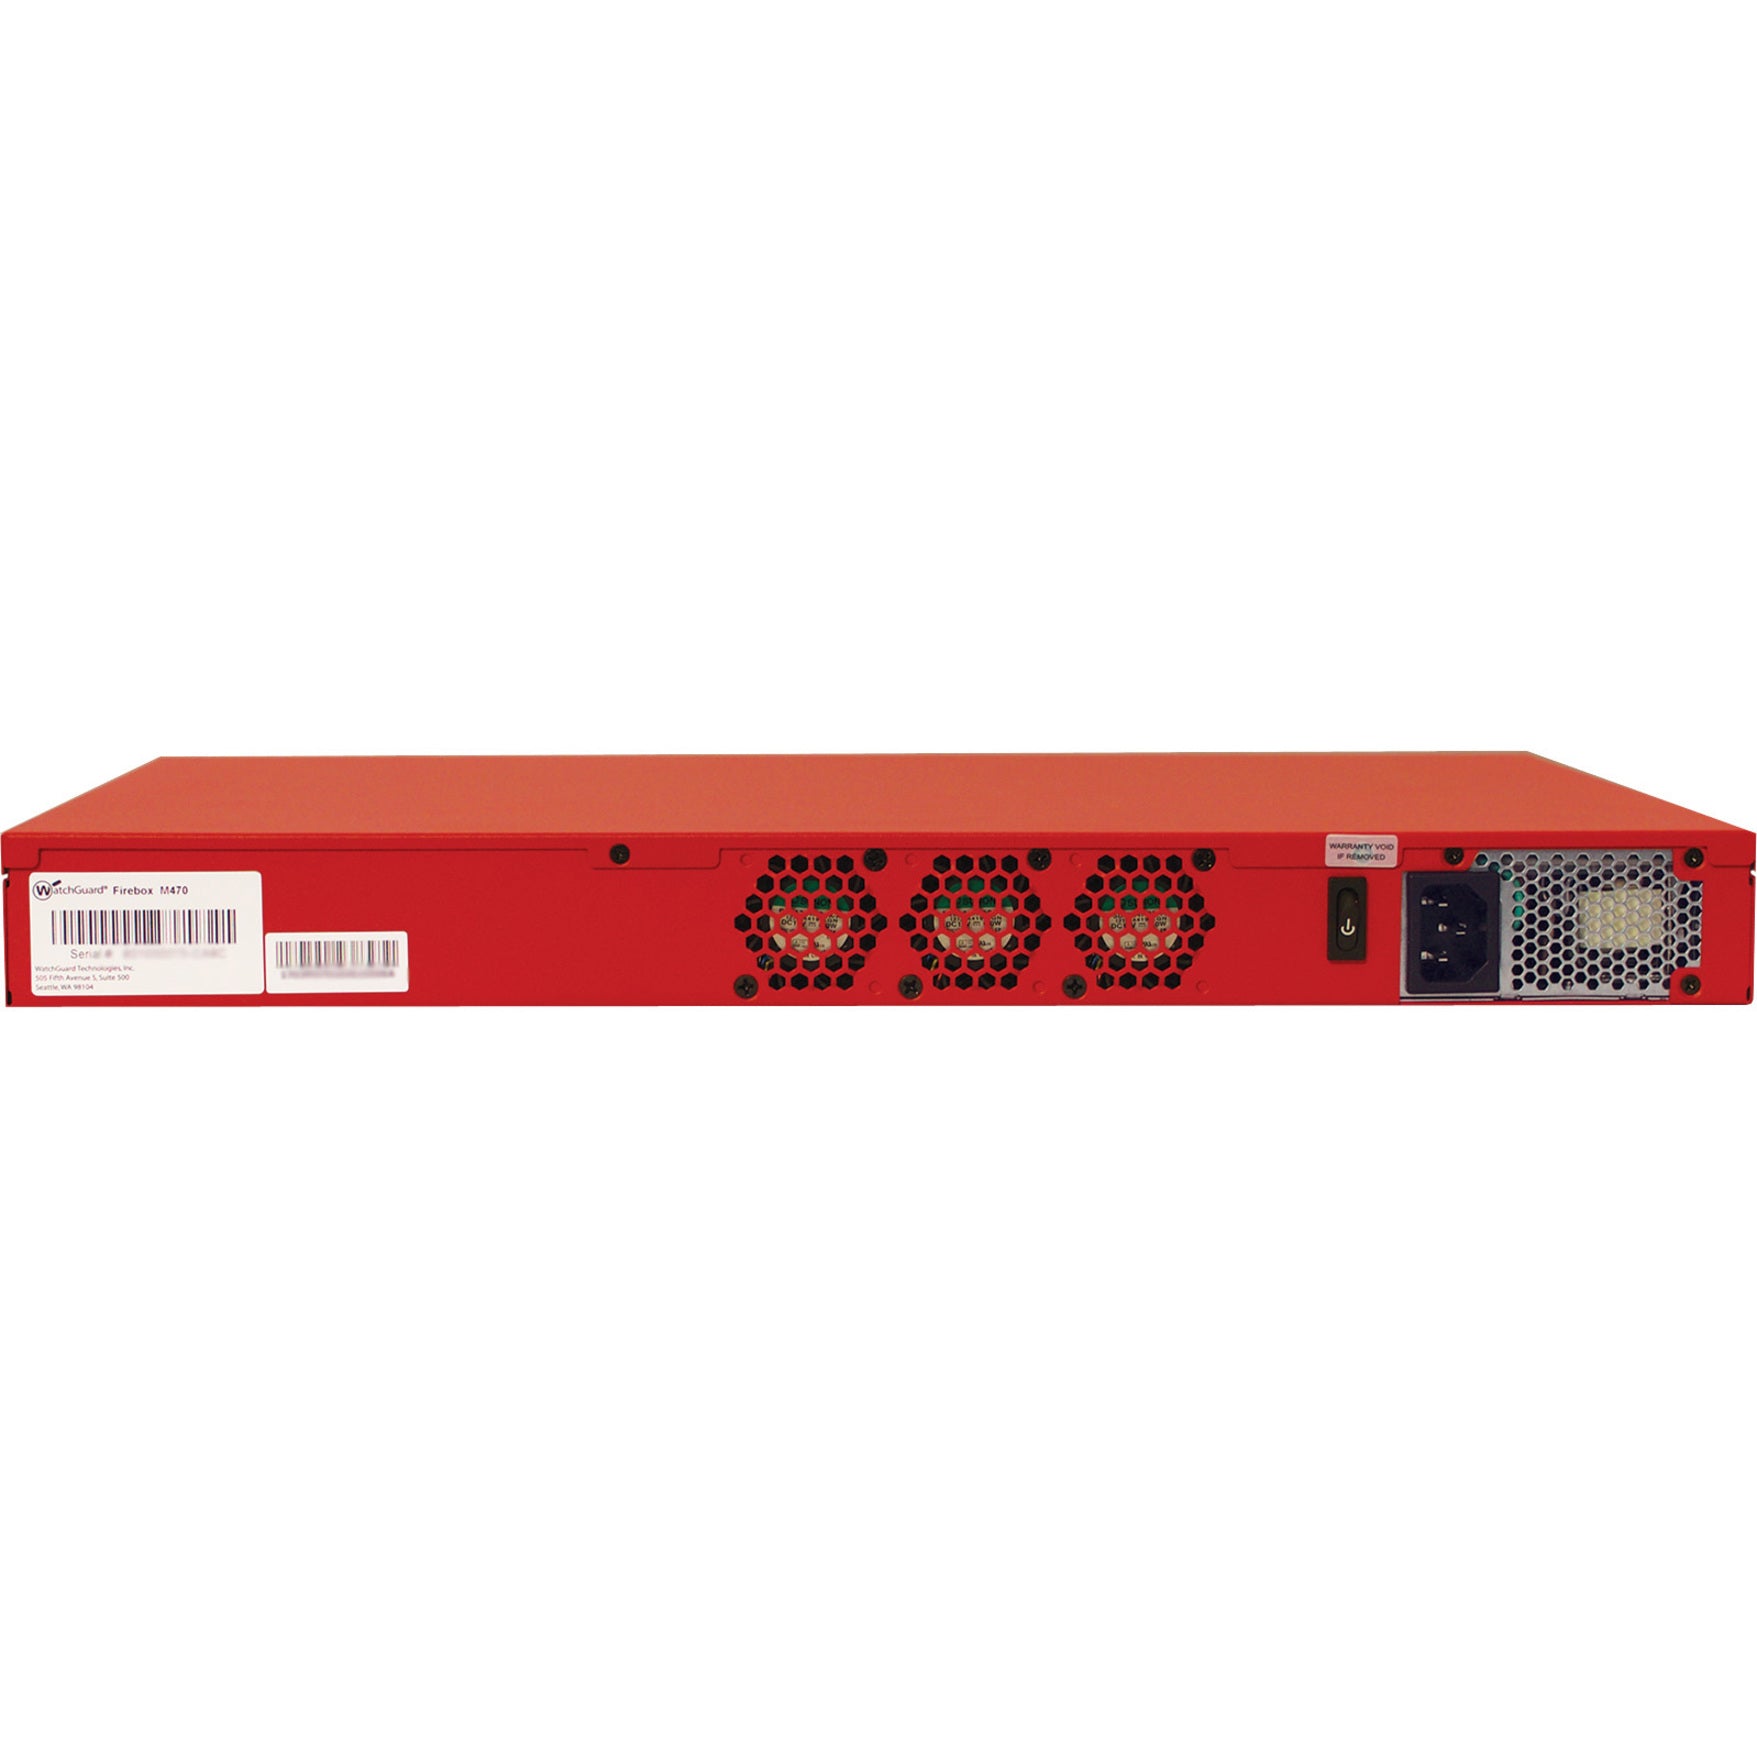 WatchGuard WGM47063 Firebox M470 Network Security/Firewall Appliance, Trade Up to 3-yr Basic Security Suite